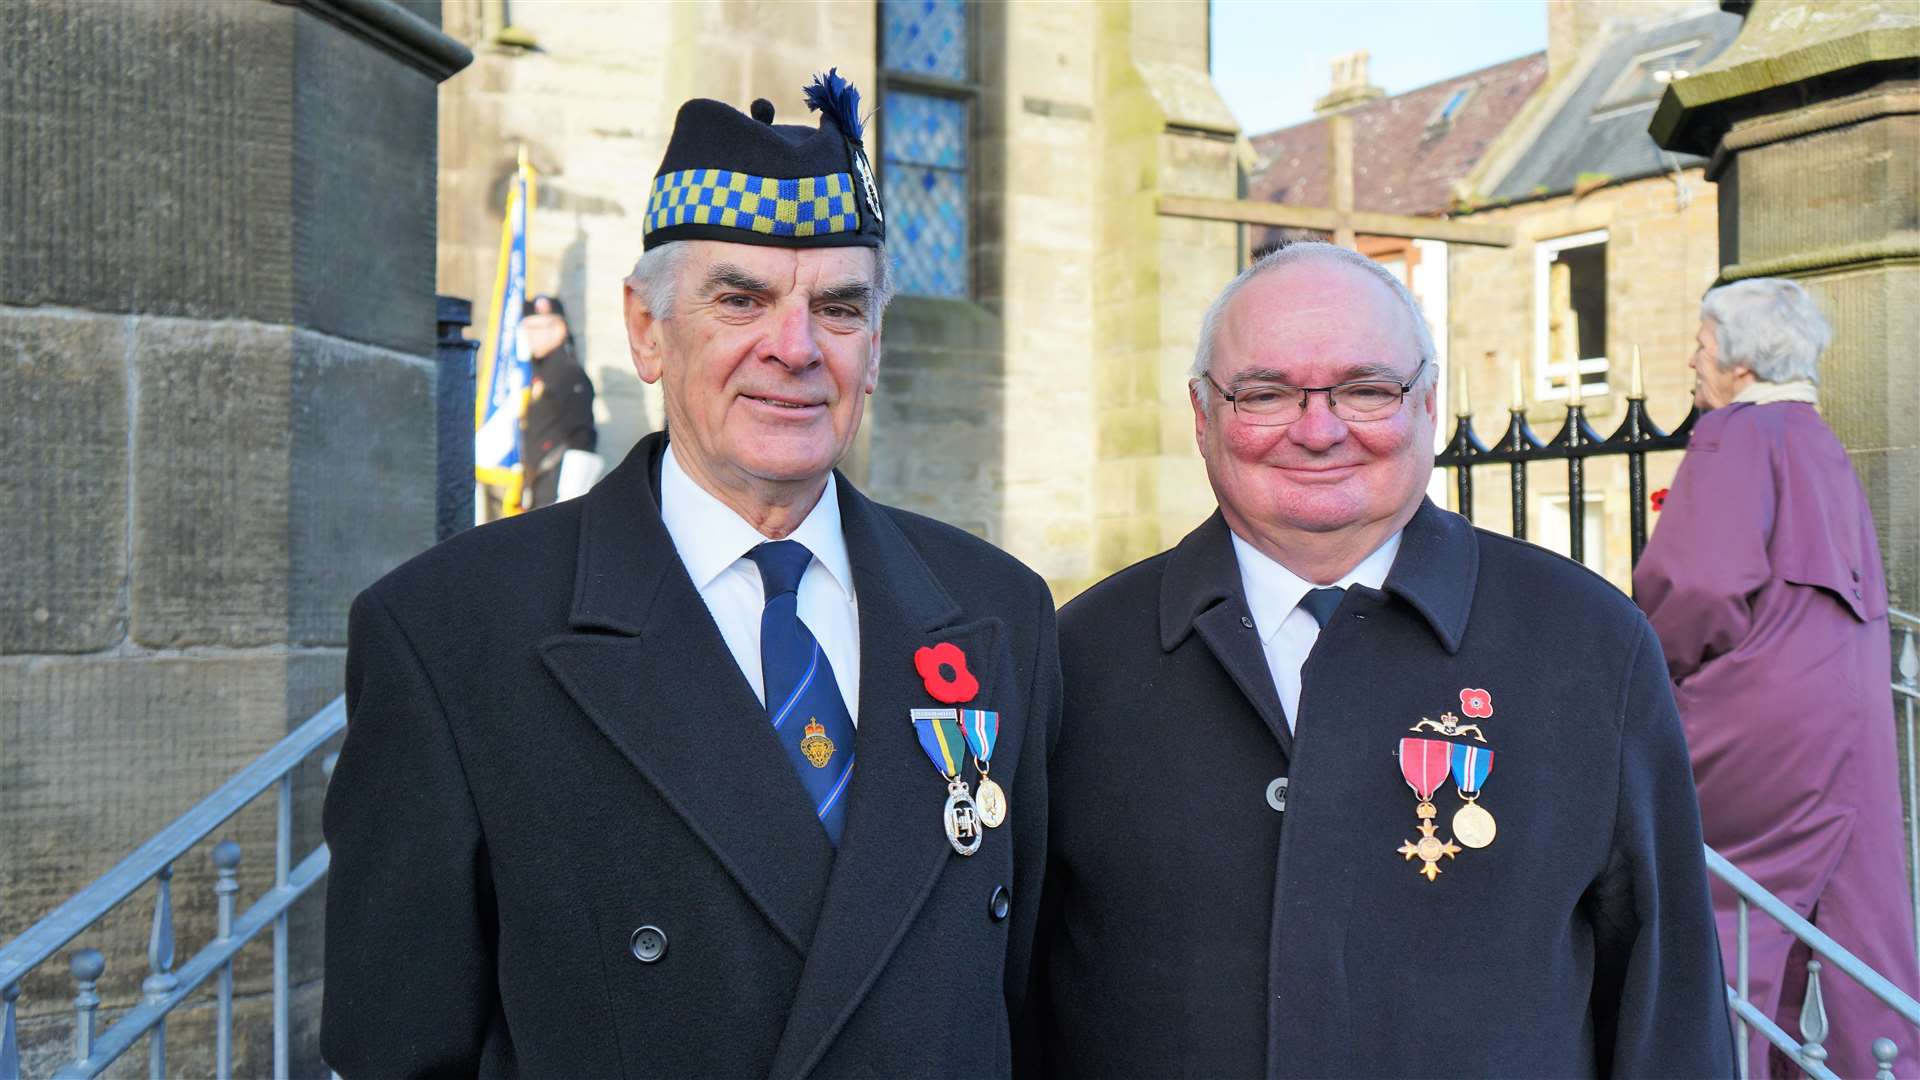 Vice president of RBLS Thurso branch Gus Mackay (left) along with the branch president Simon Middlemas at the Remembrance Sunday event in Thurso. Picture: DGS